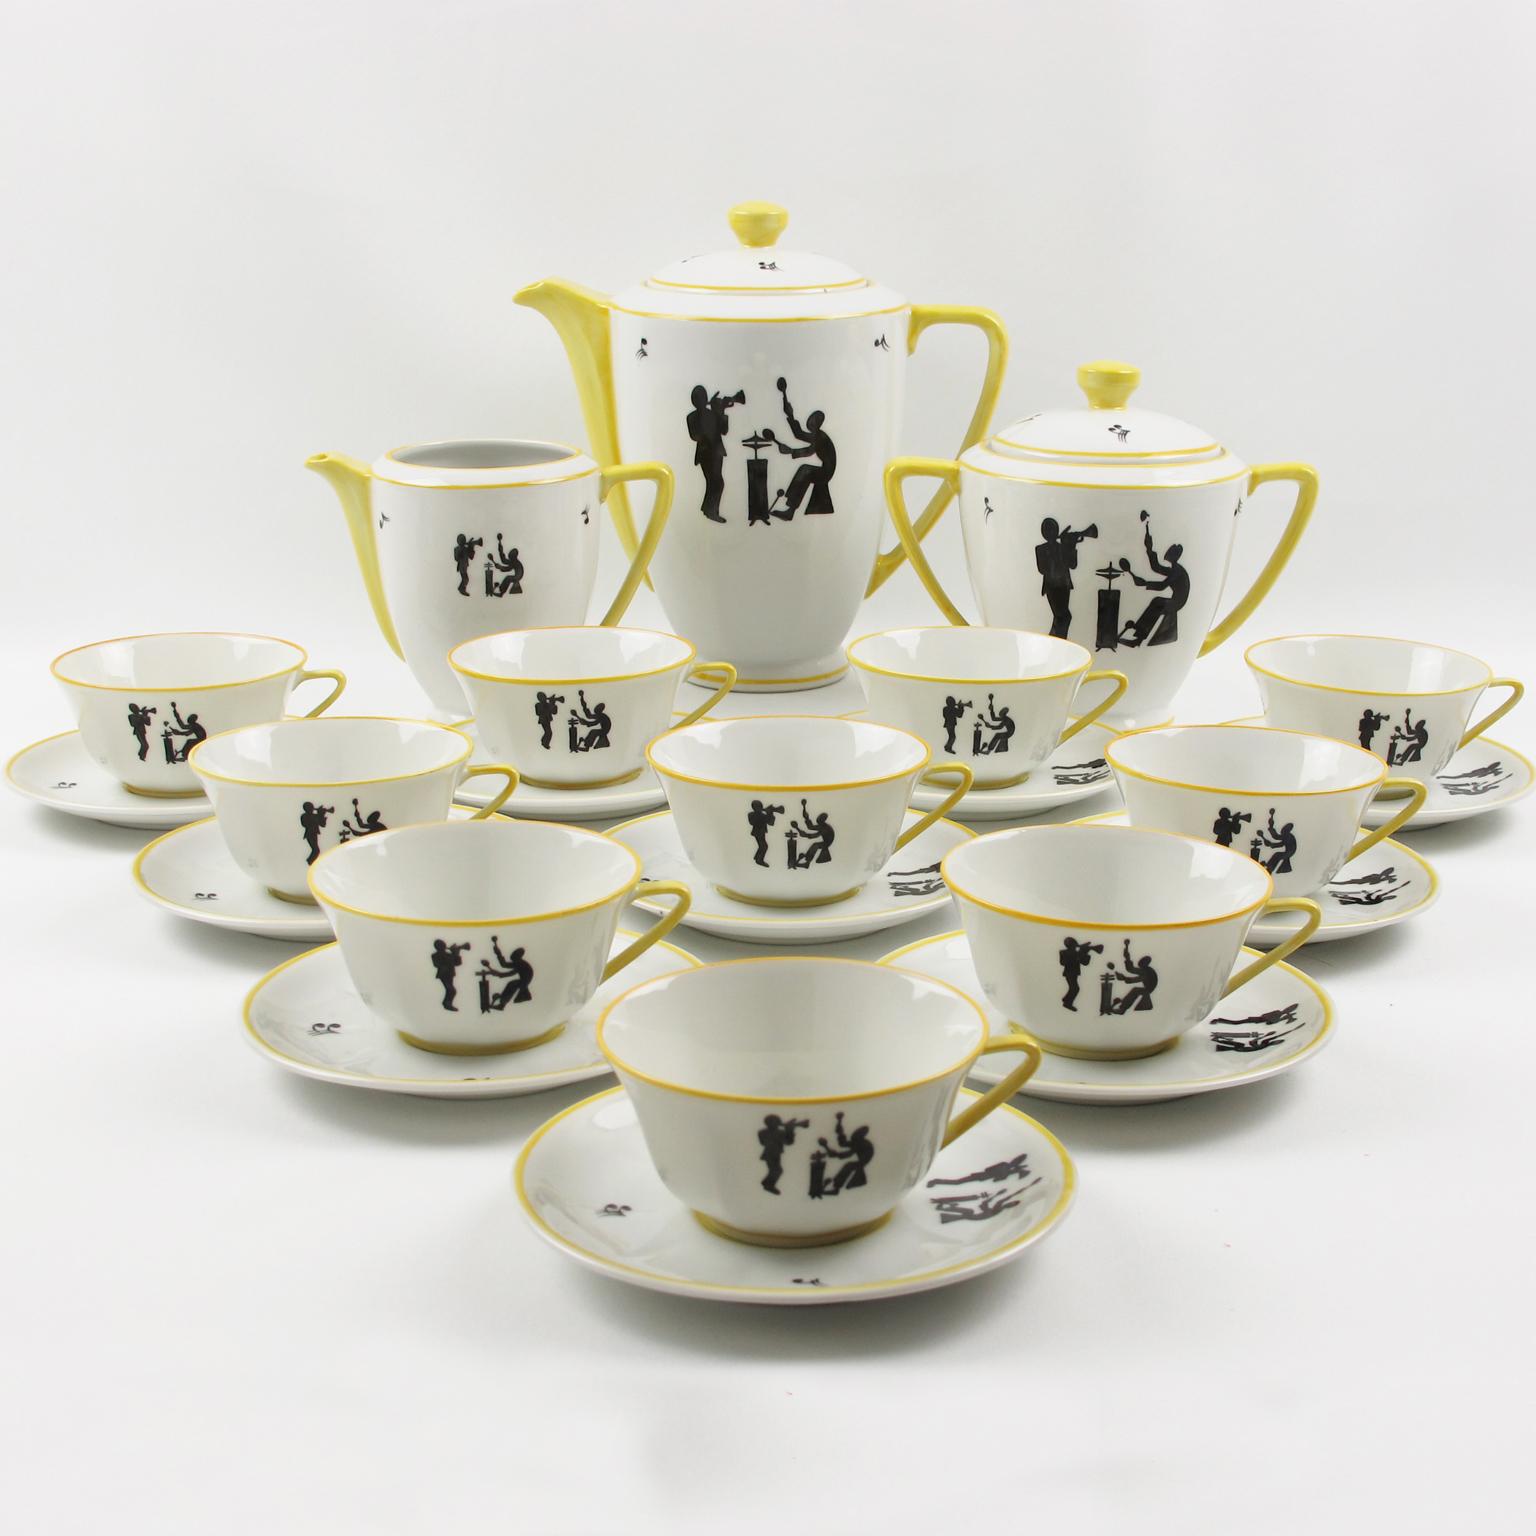 A stunning 1960s Limoges France porcelain tea or coffee service set. 
The set features 13 pieces: tea or coffee pot, creamer, sugar pot, and ten cups and saucers. 
Rare hand-painted jazz band design in black with musical notes and bright yellow